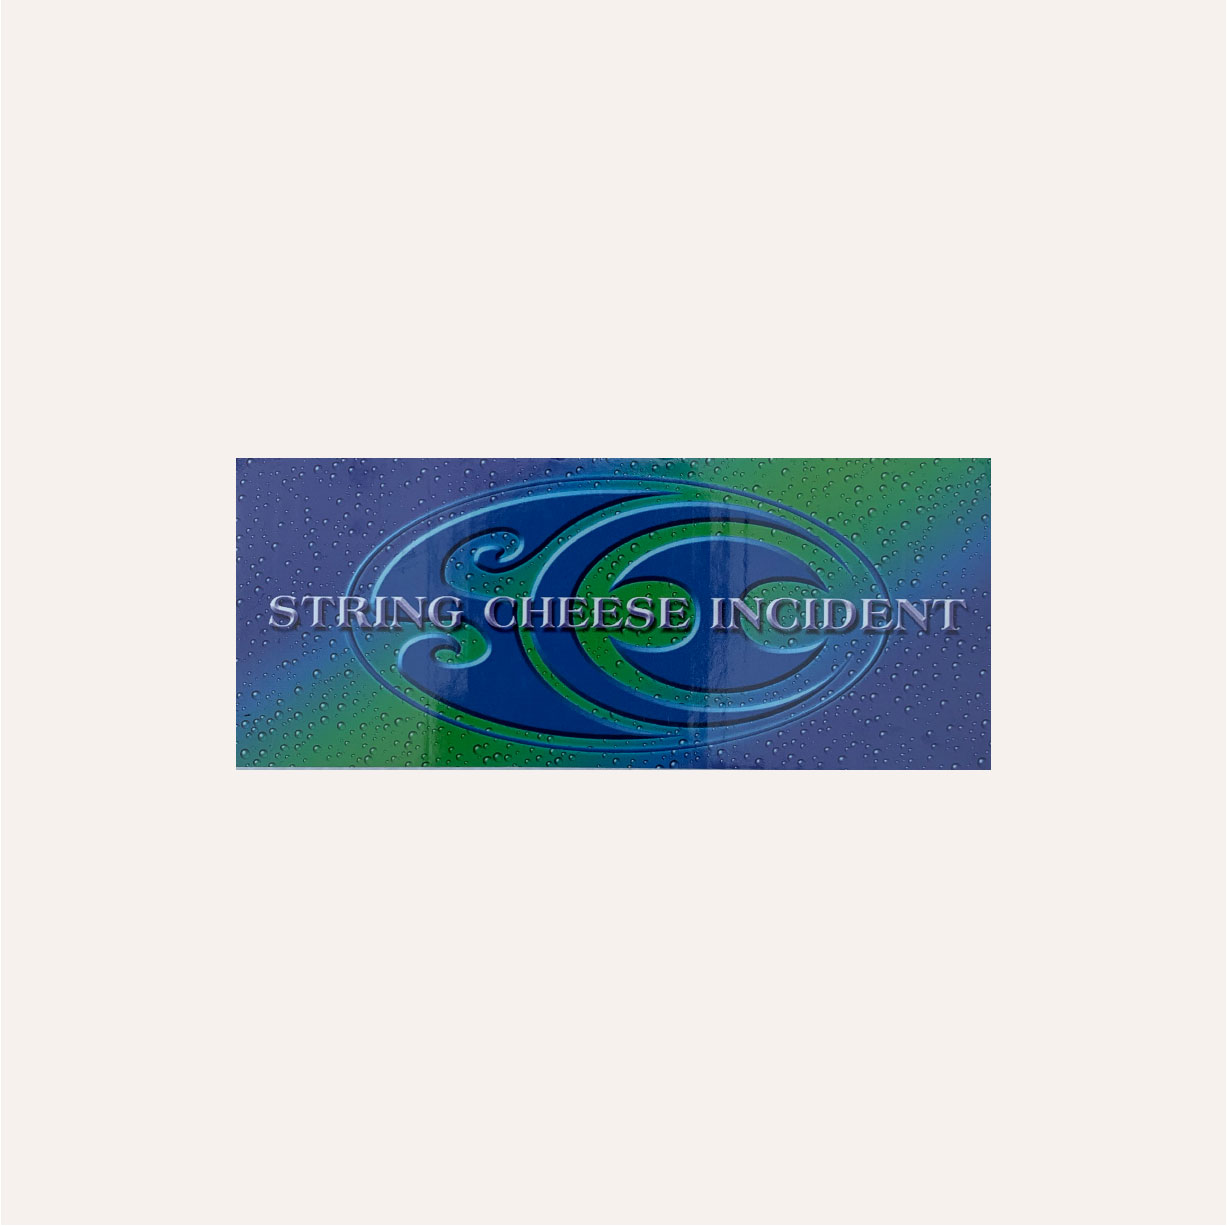 The String Cheese Incident - Stickers - SCI Water Sticker